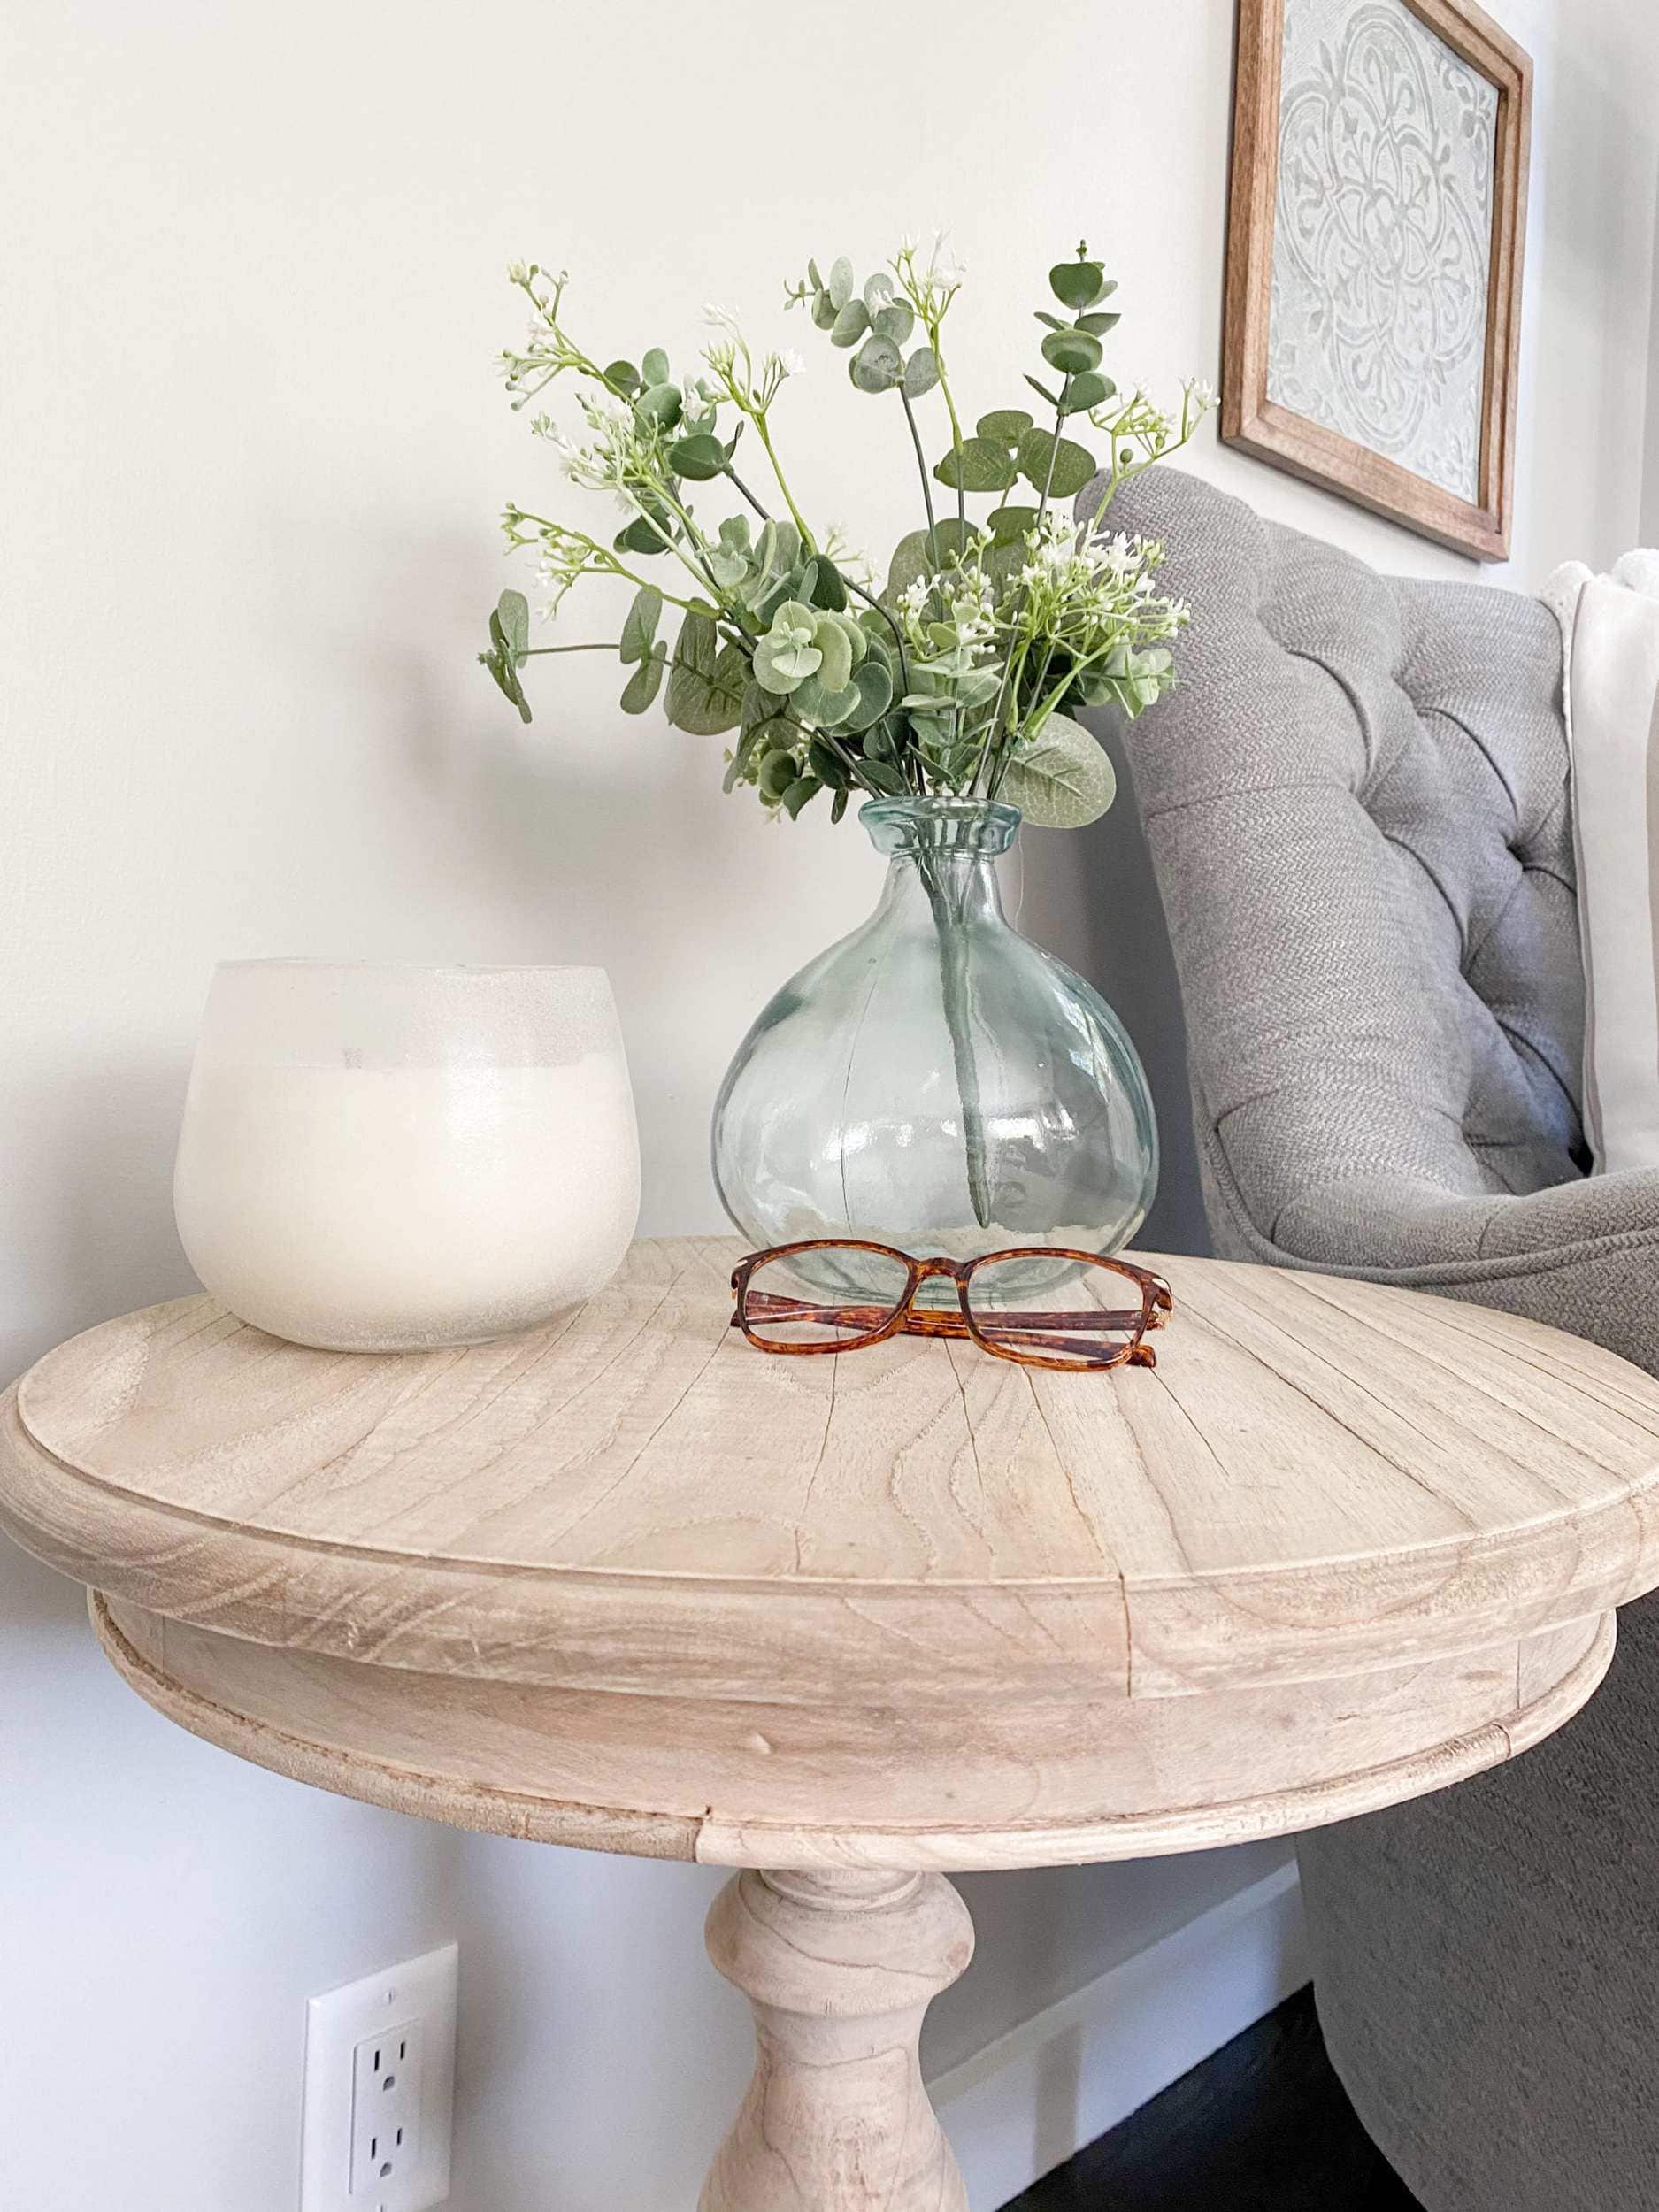 unfinished wood table with candle, reading glasses, and demijohn